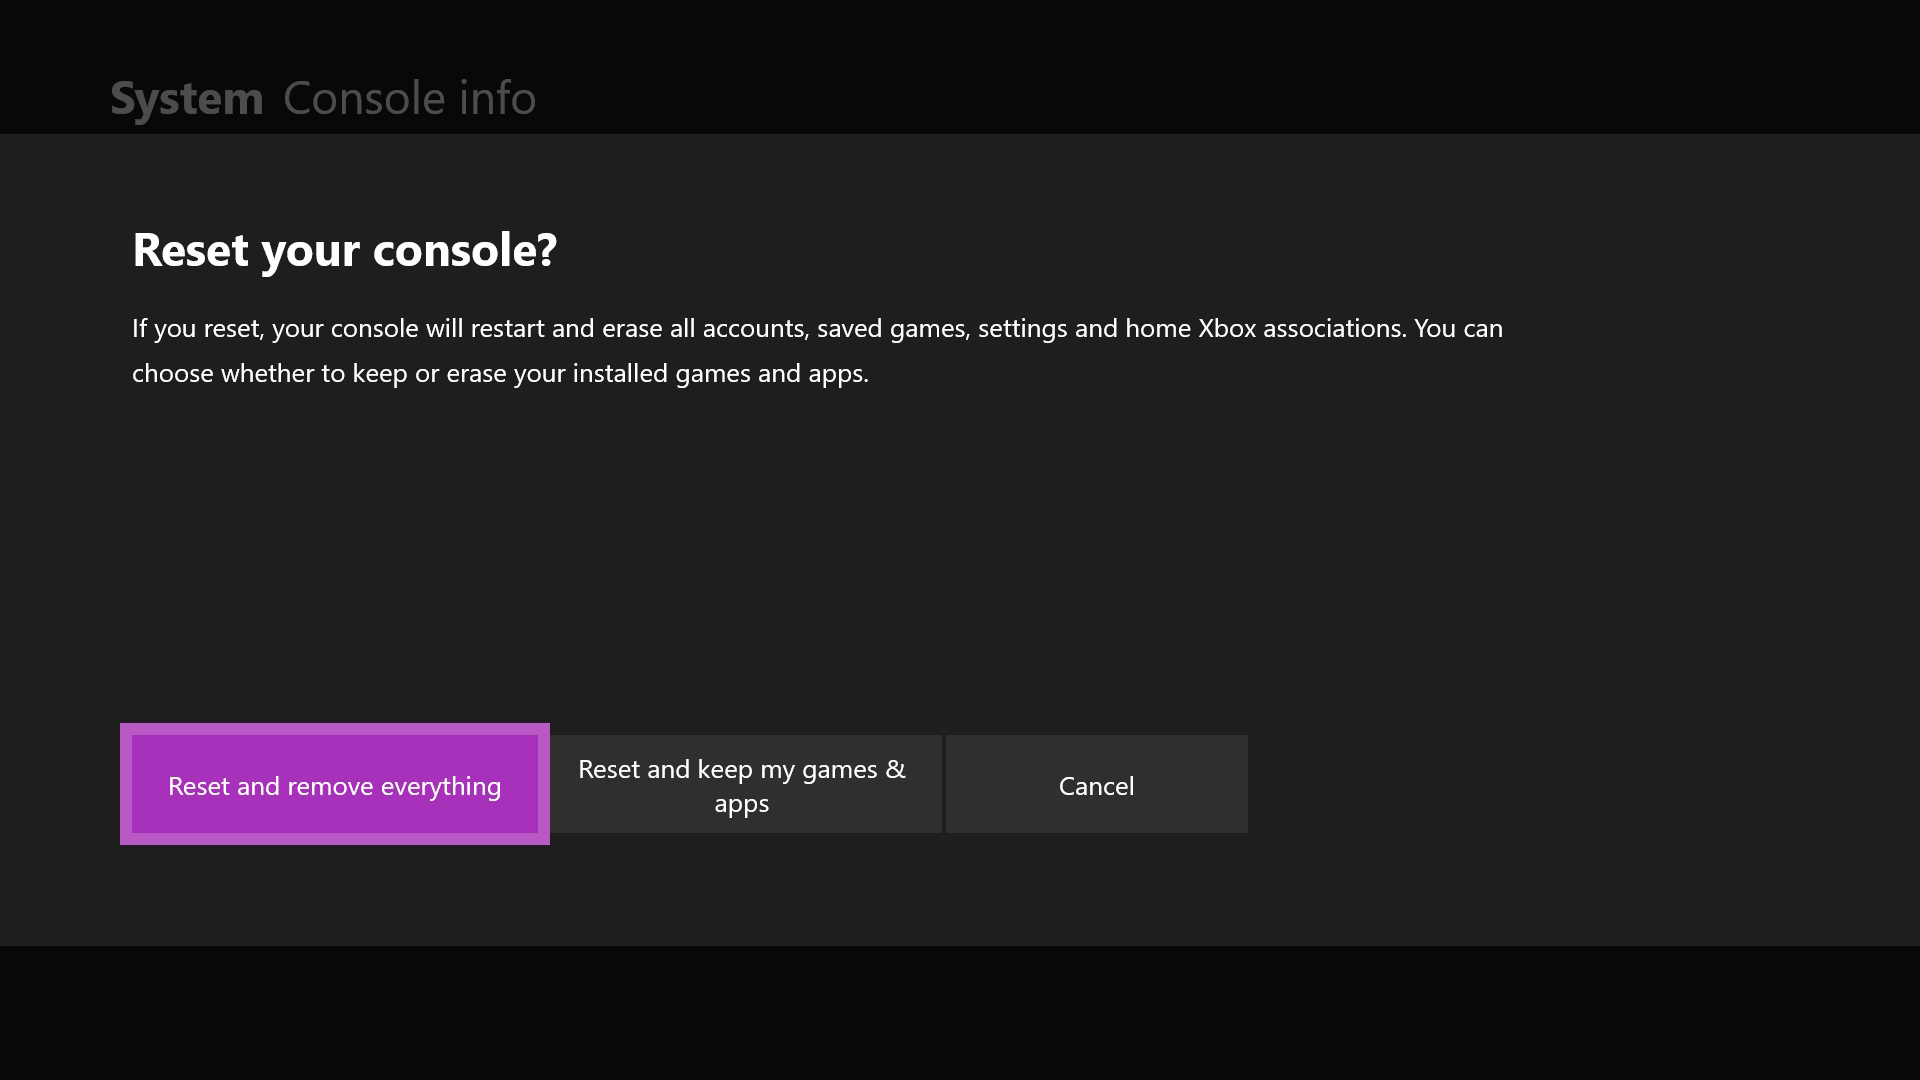 how to make xbox home account